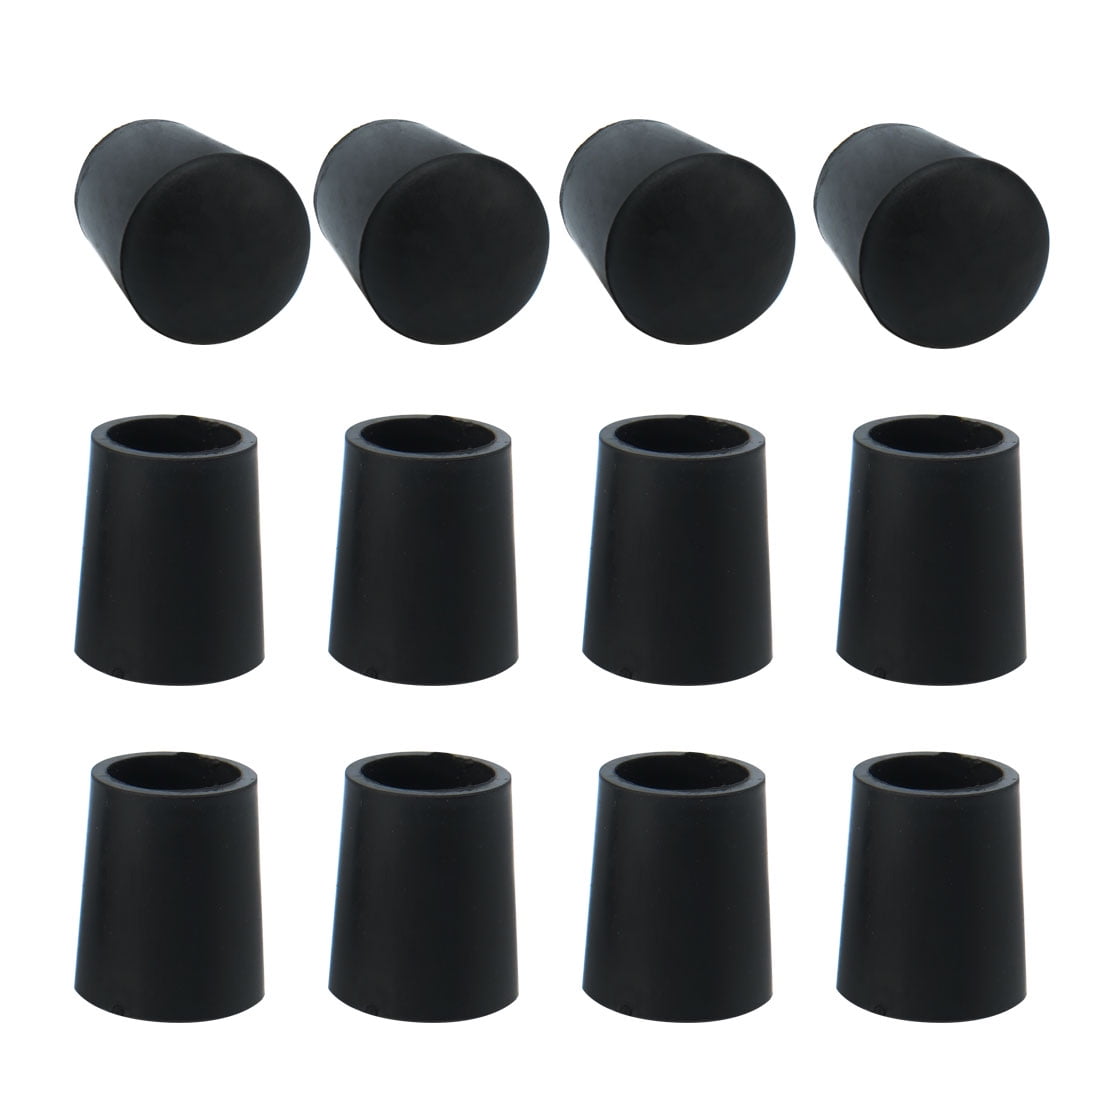 0 31 8mm Rubber Chair Leg Tips Caps Pads Furniture Couch Table